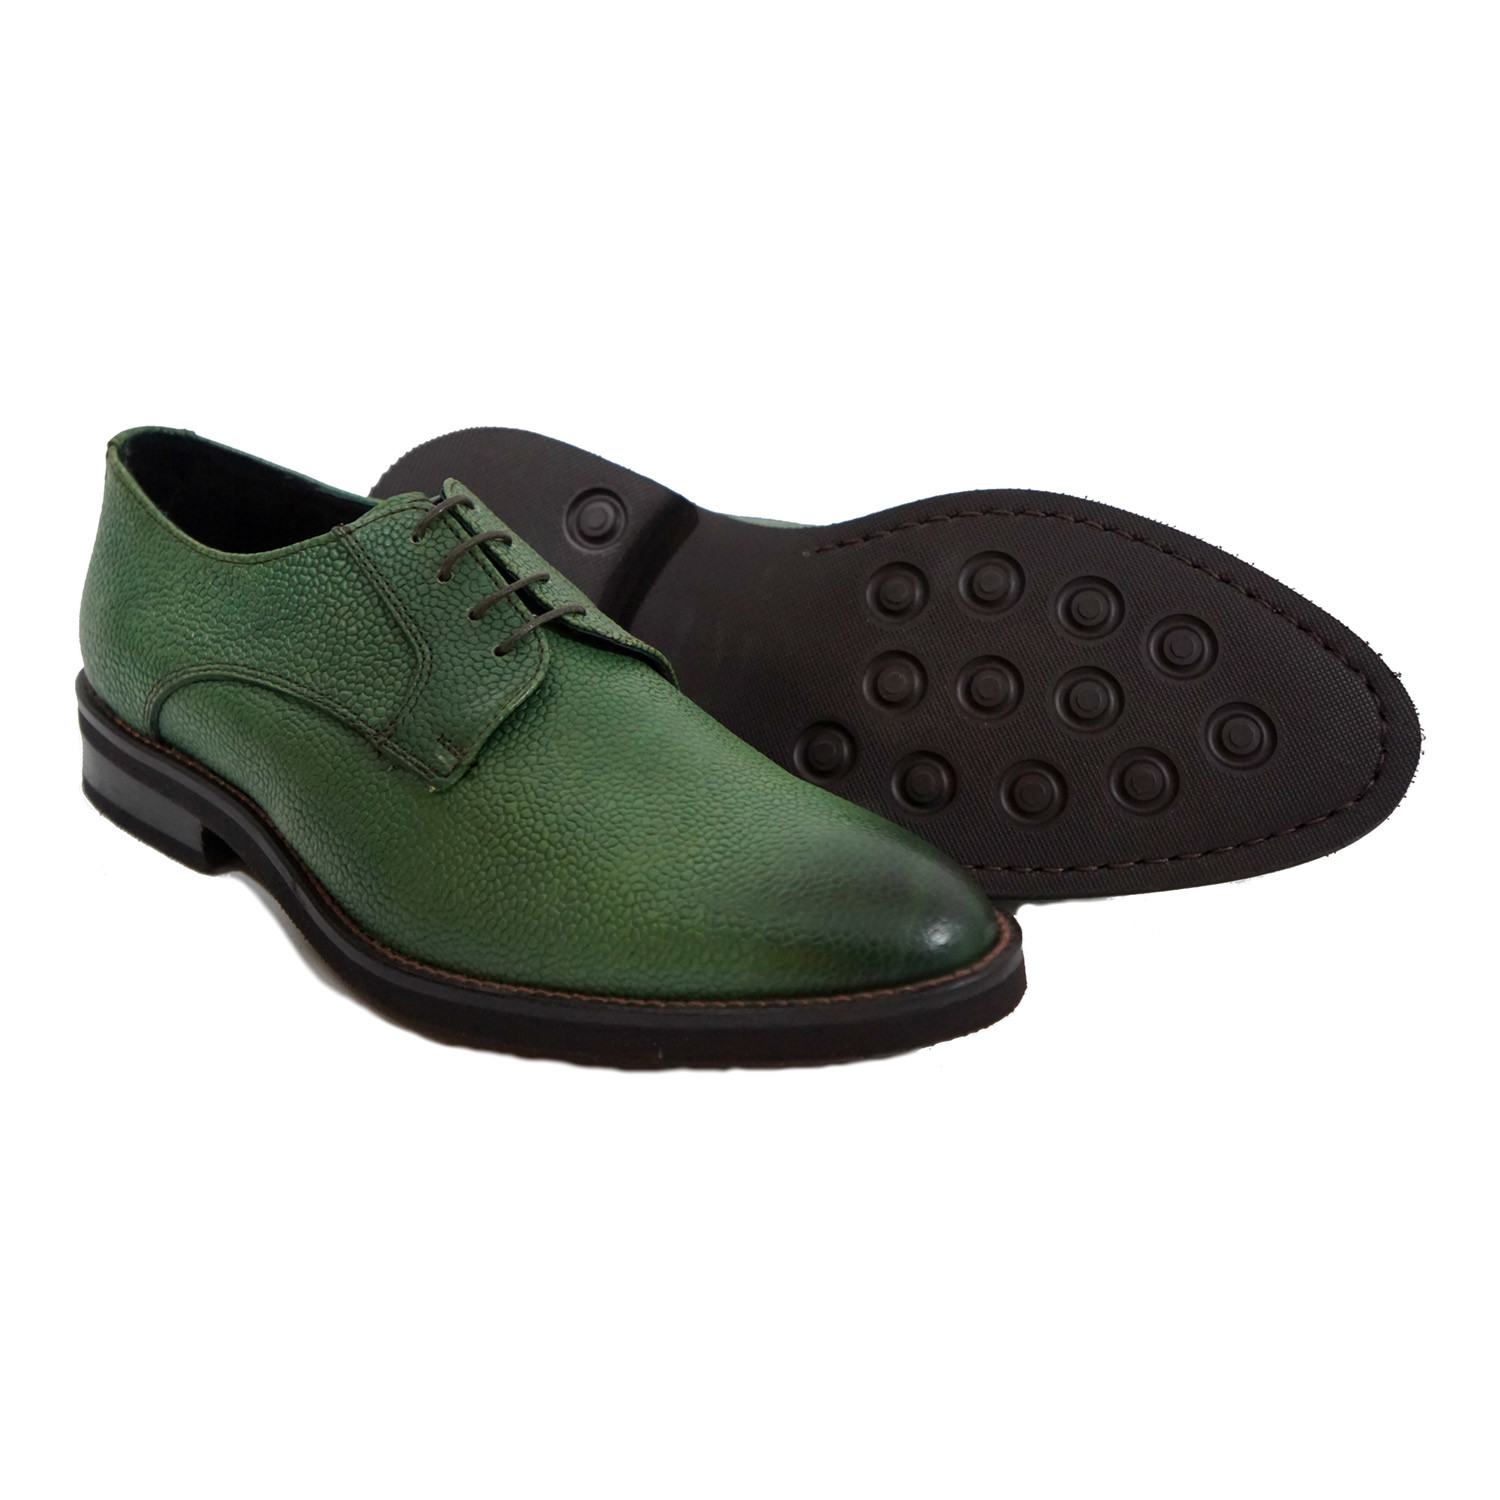 forest green dress shoes